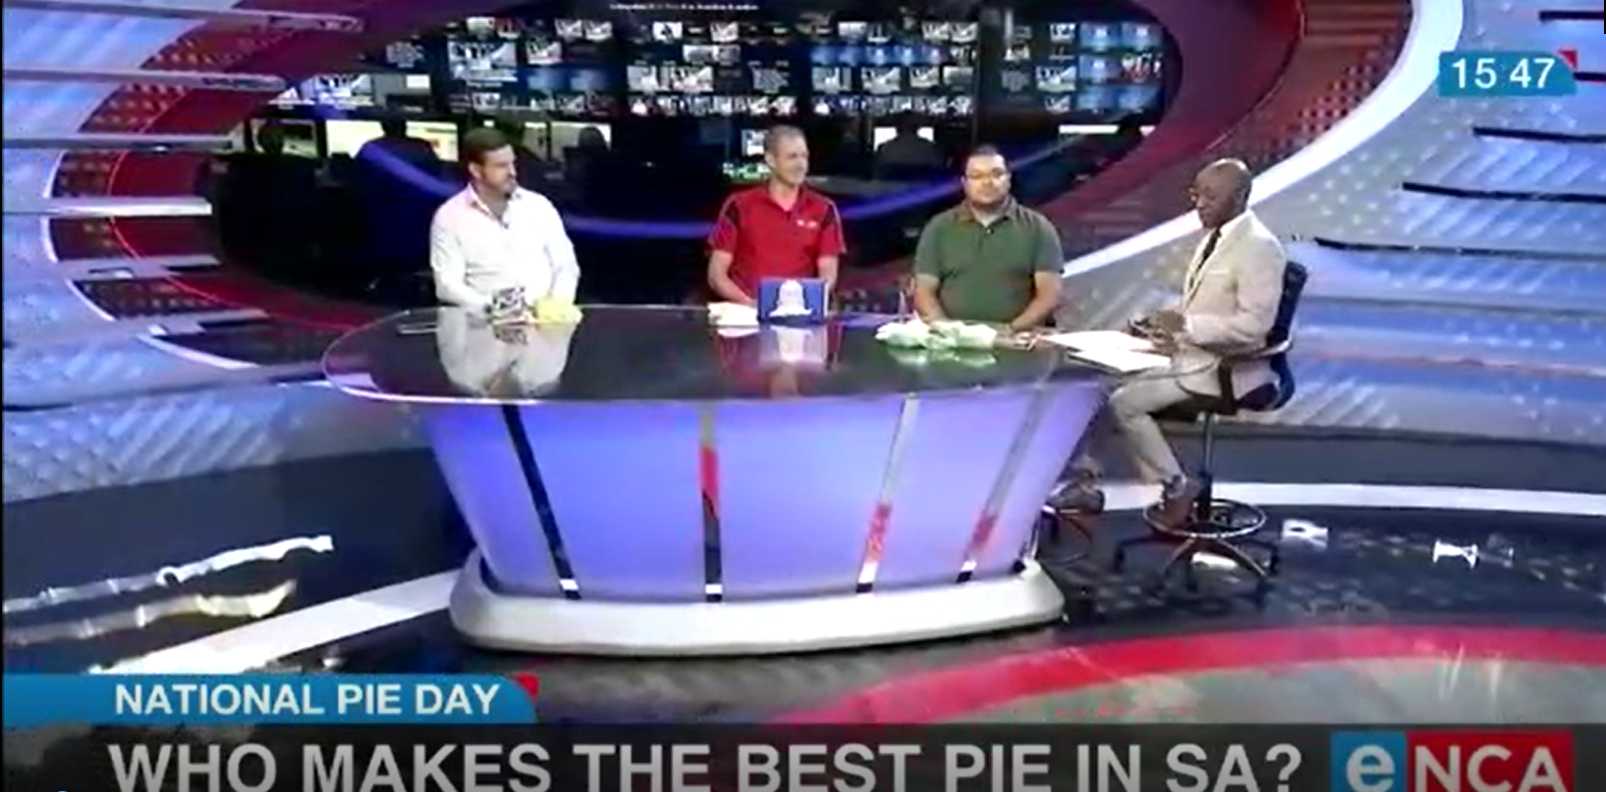 National Pie Day ENCA feature